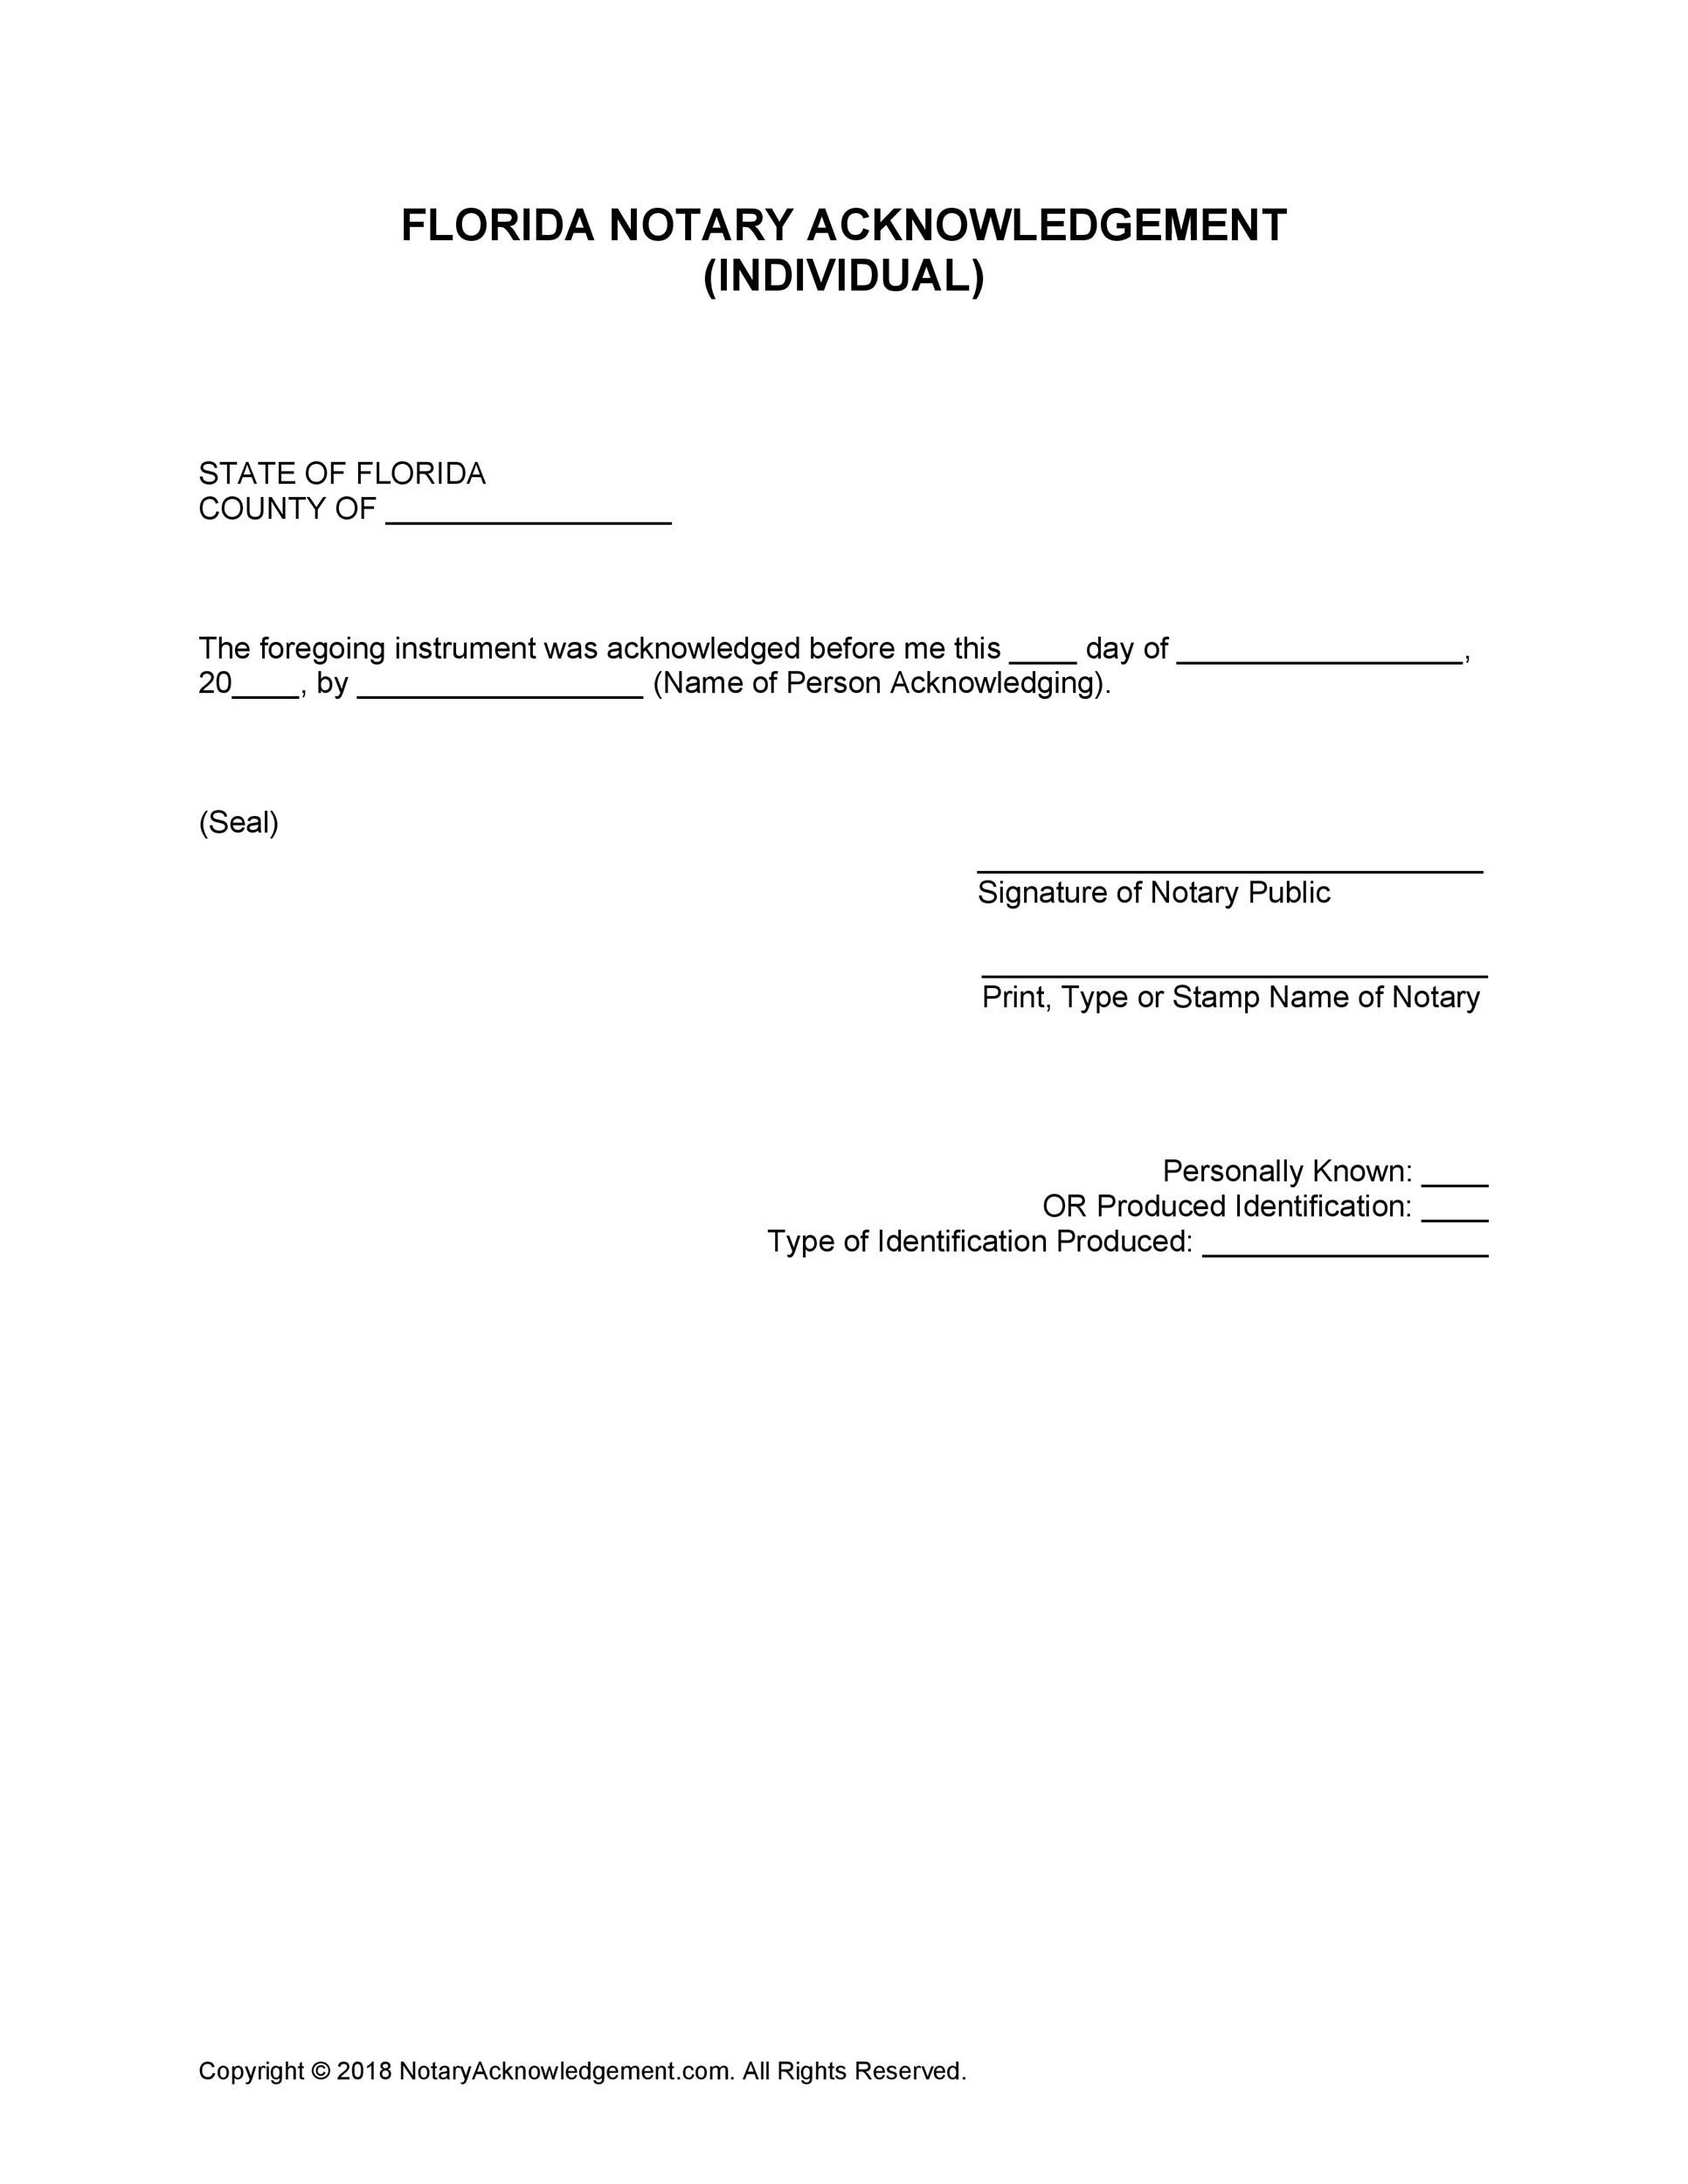 40 Free Notary Acknowledgement Statement Templates TemplateLab